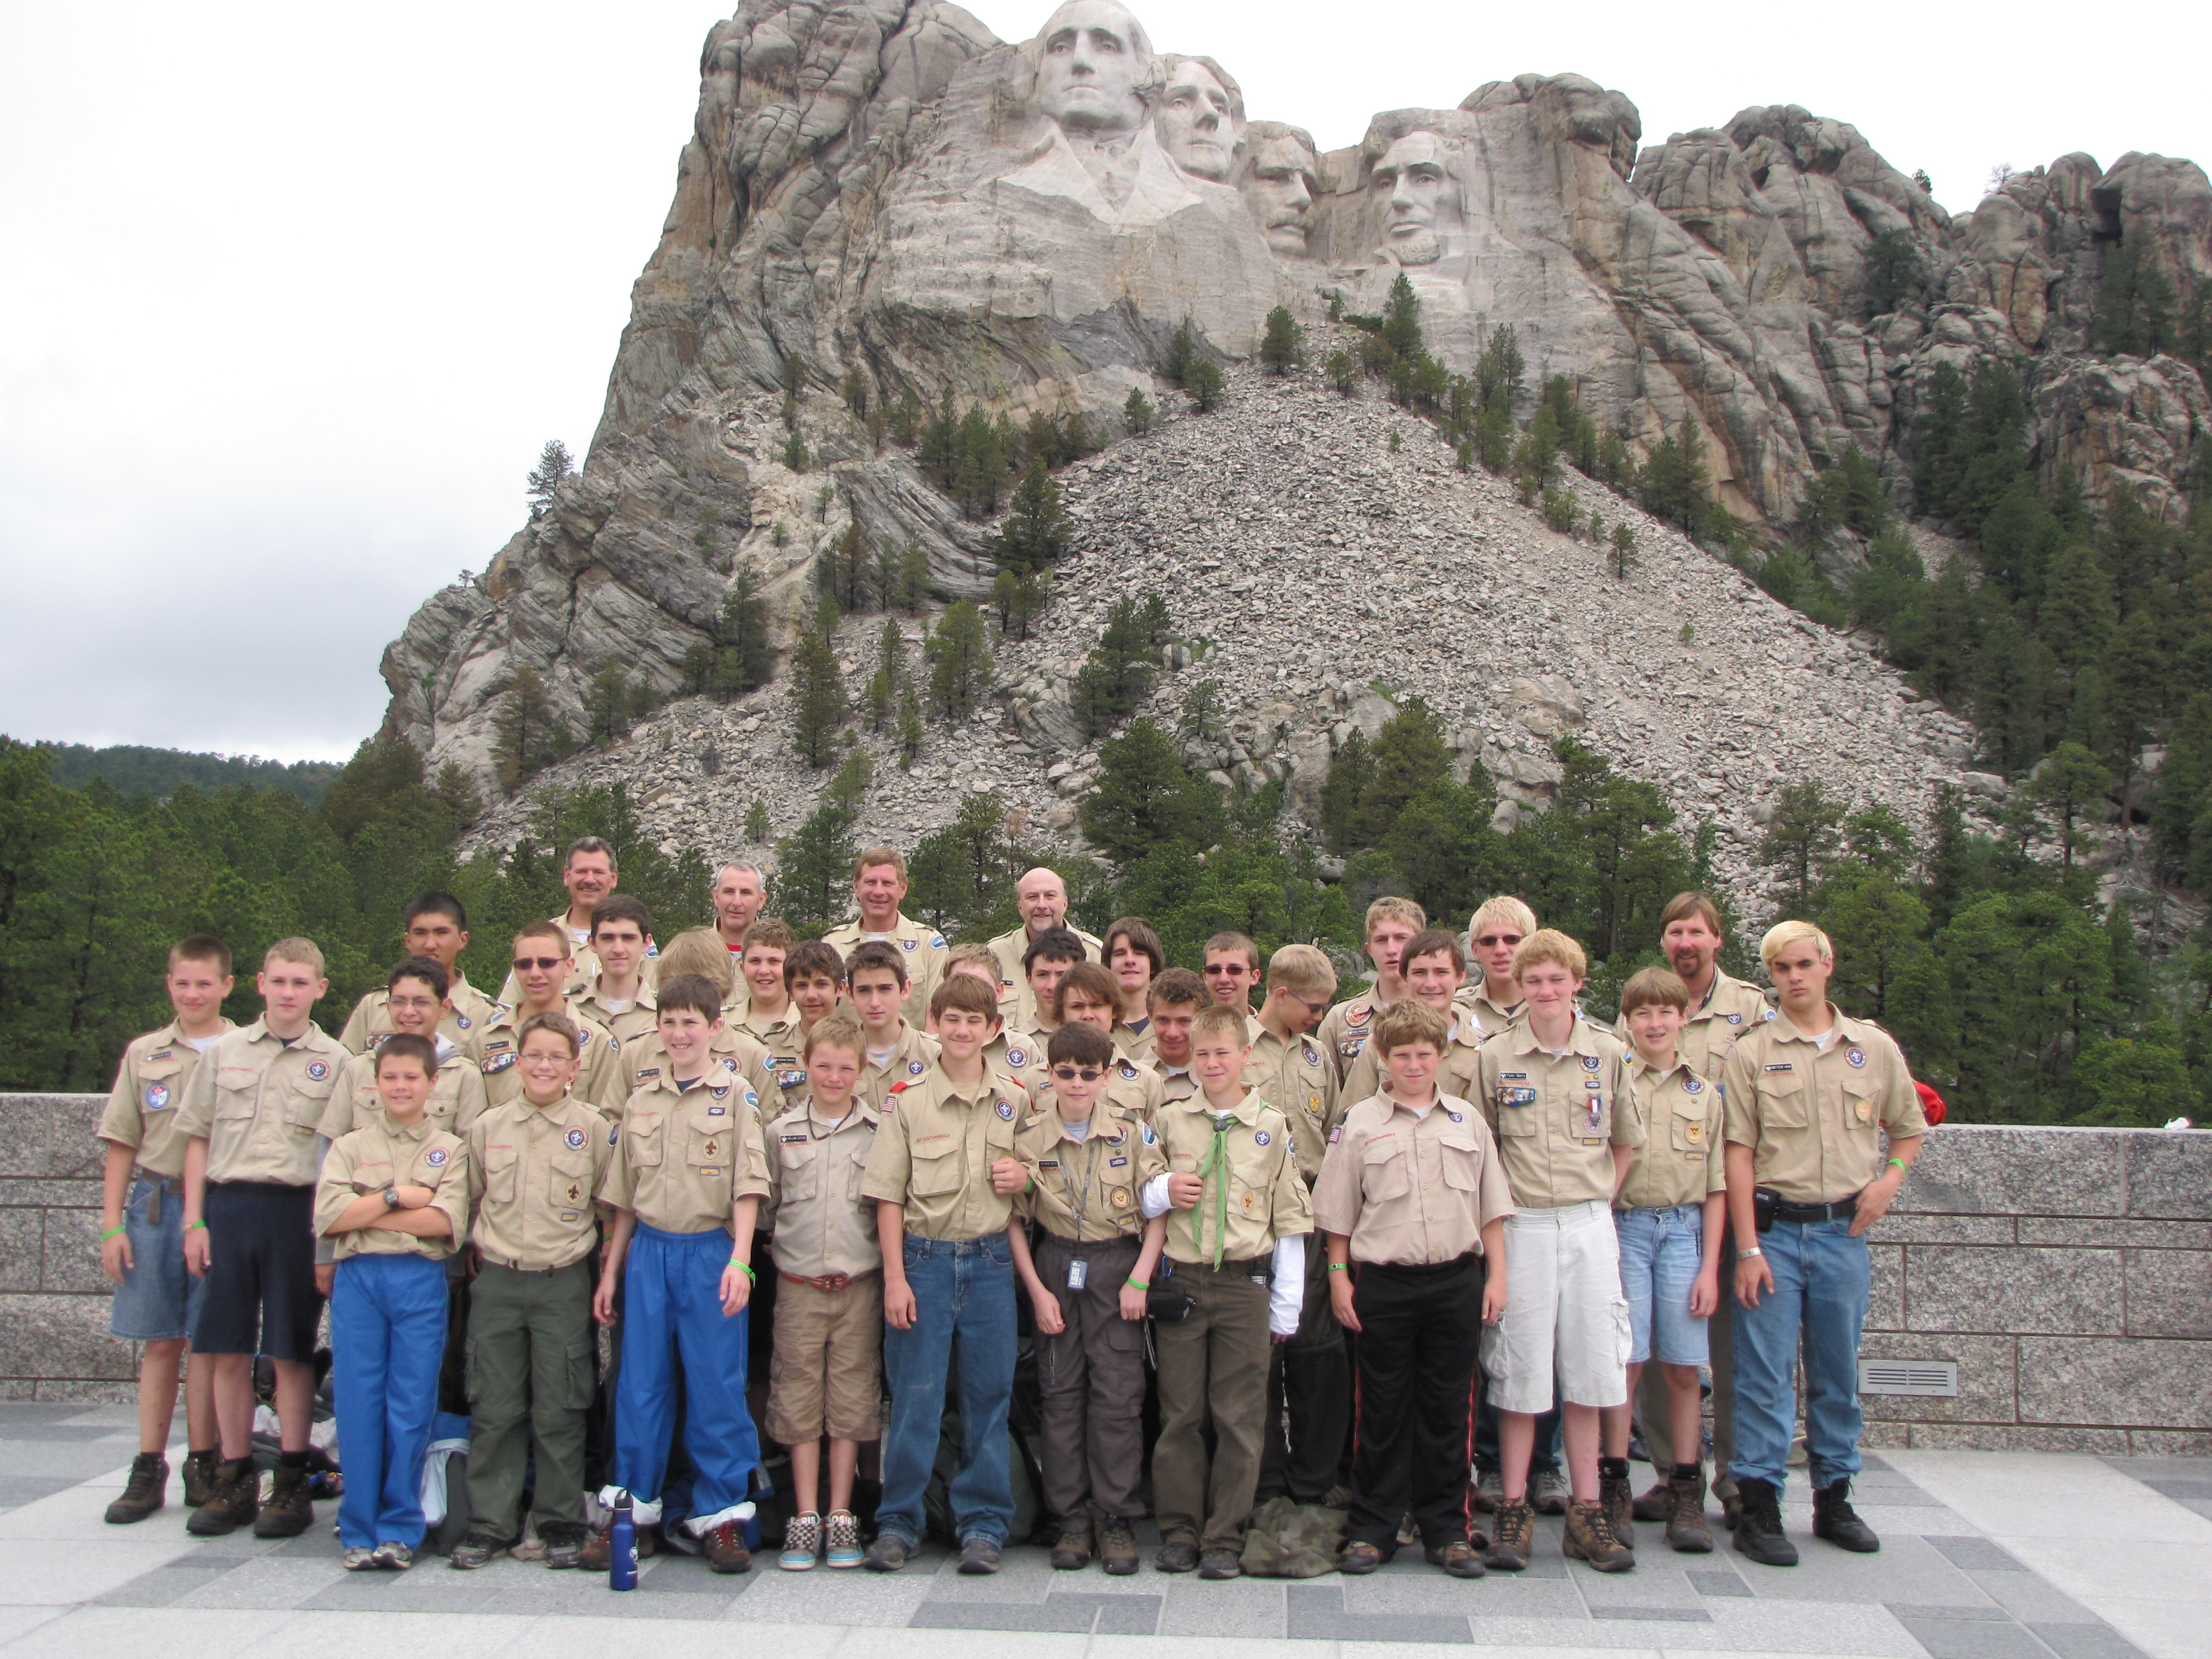 BOY SCOUT TROOP 268 CELEBRATES 25TH ANNIVERSARY